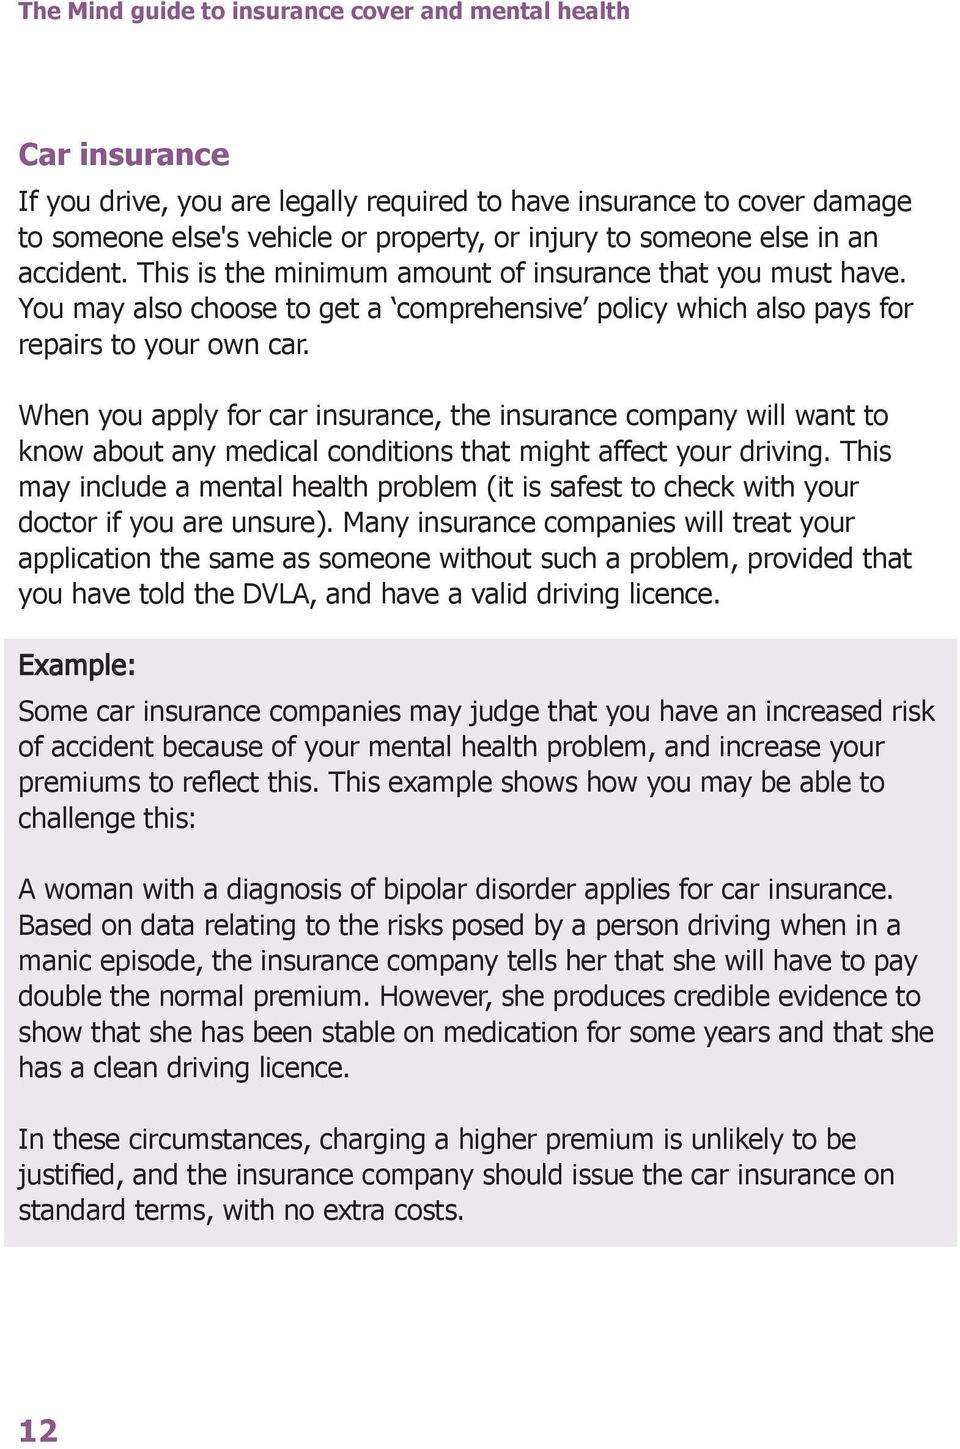 When you apply for car insurance, the insurance company will want to know about any medical conditions that might affect your driving.